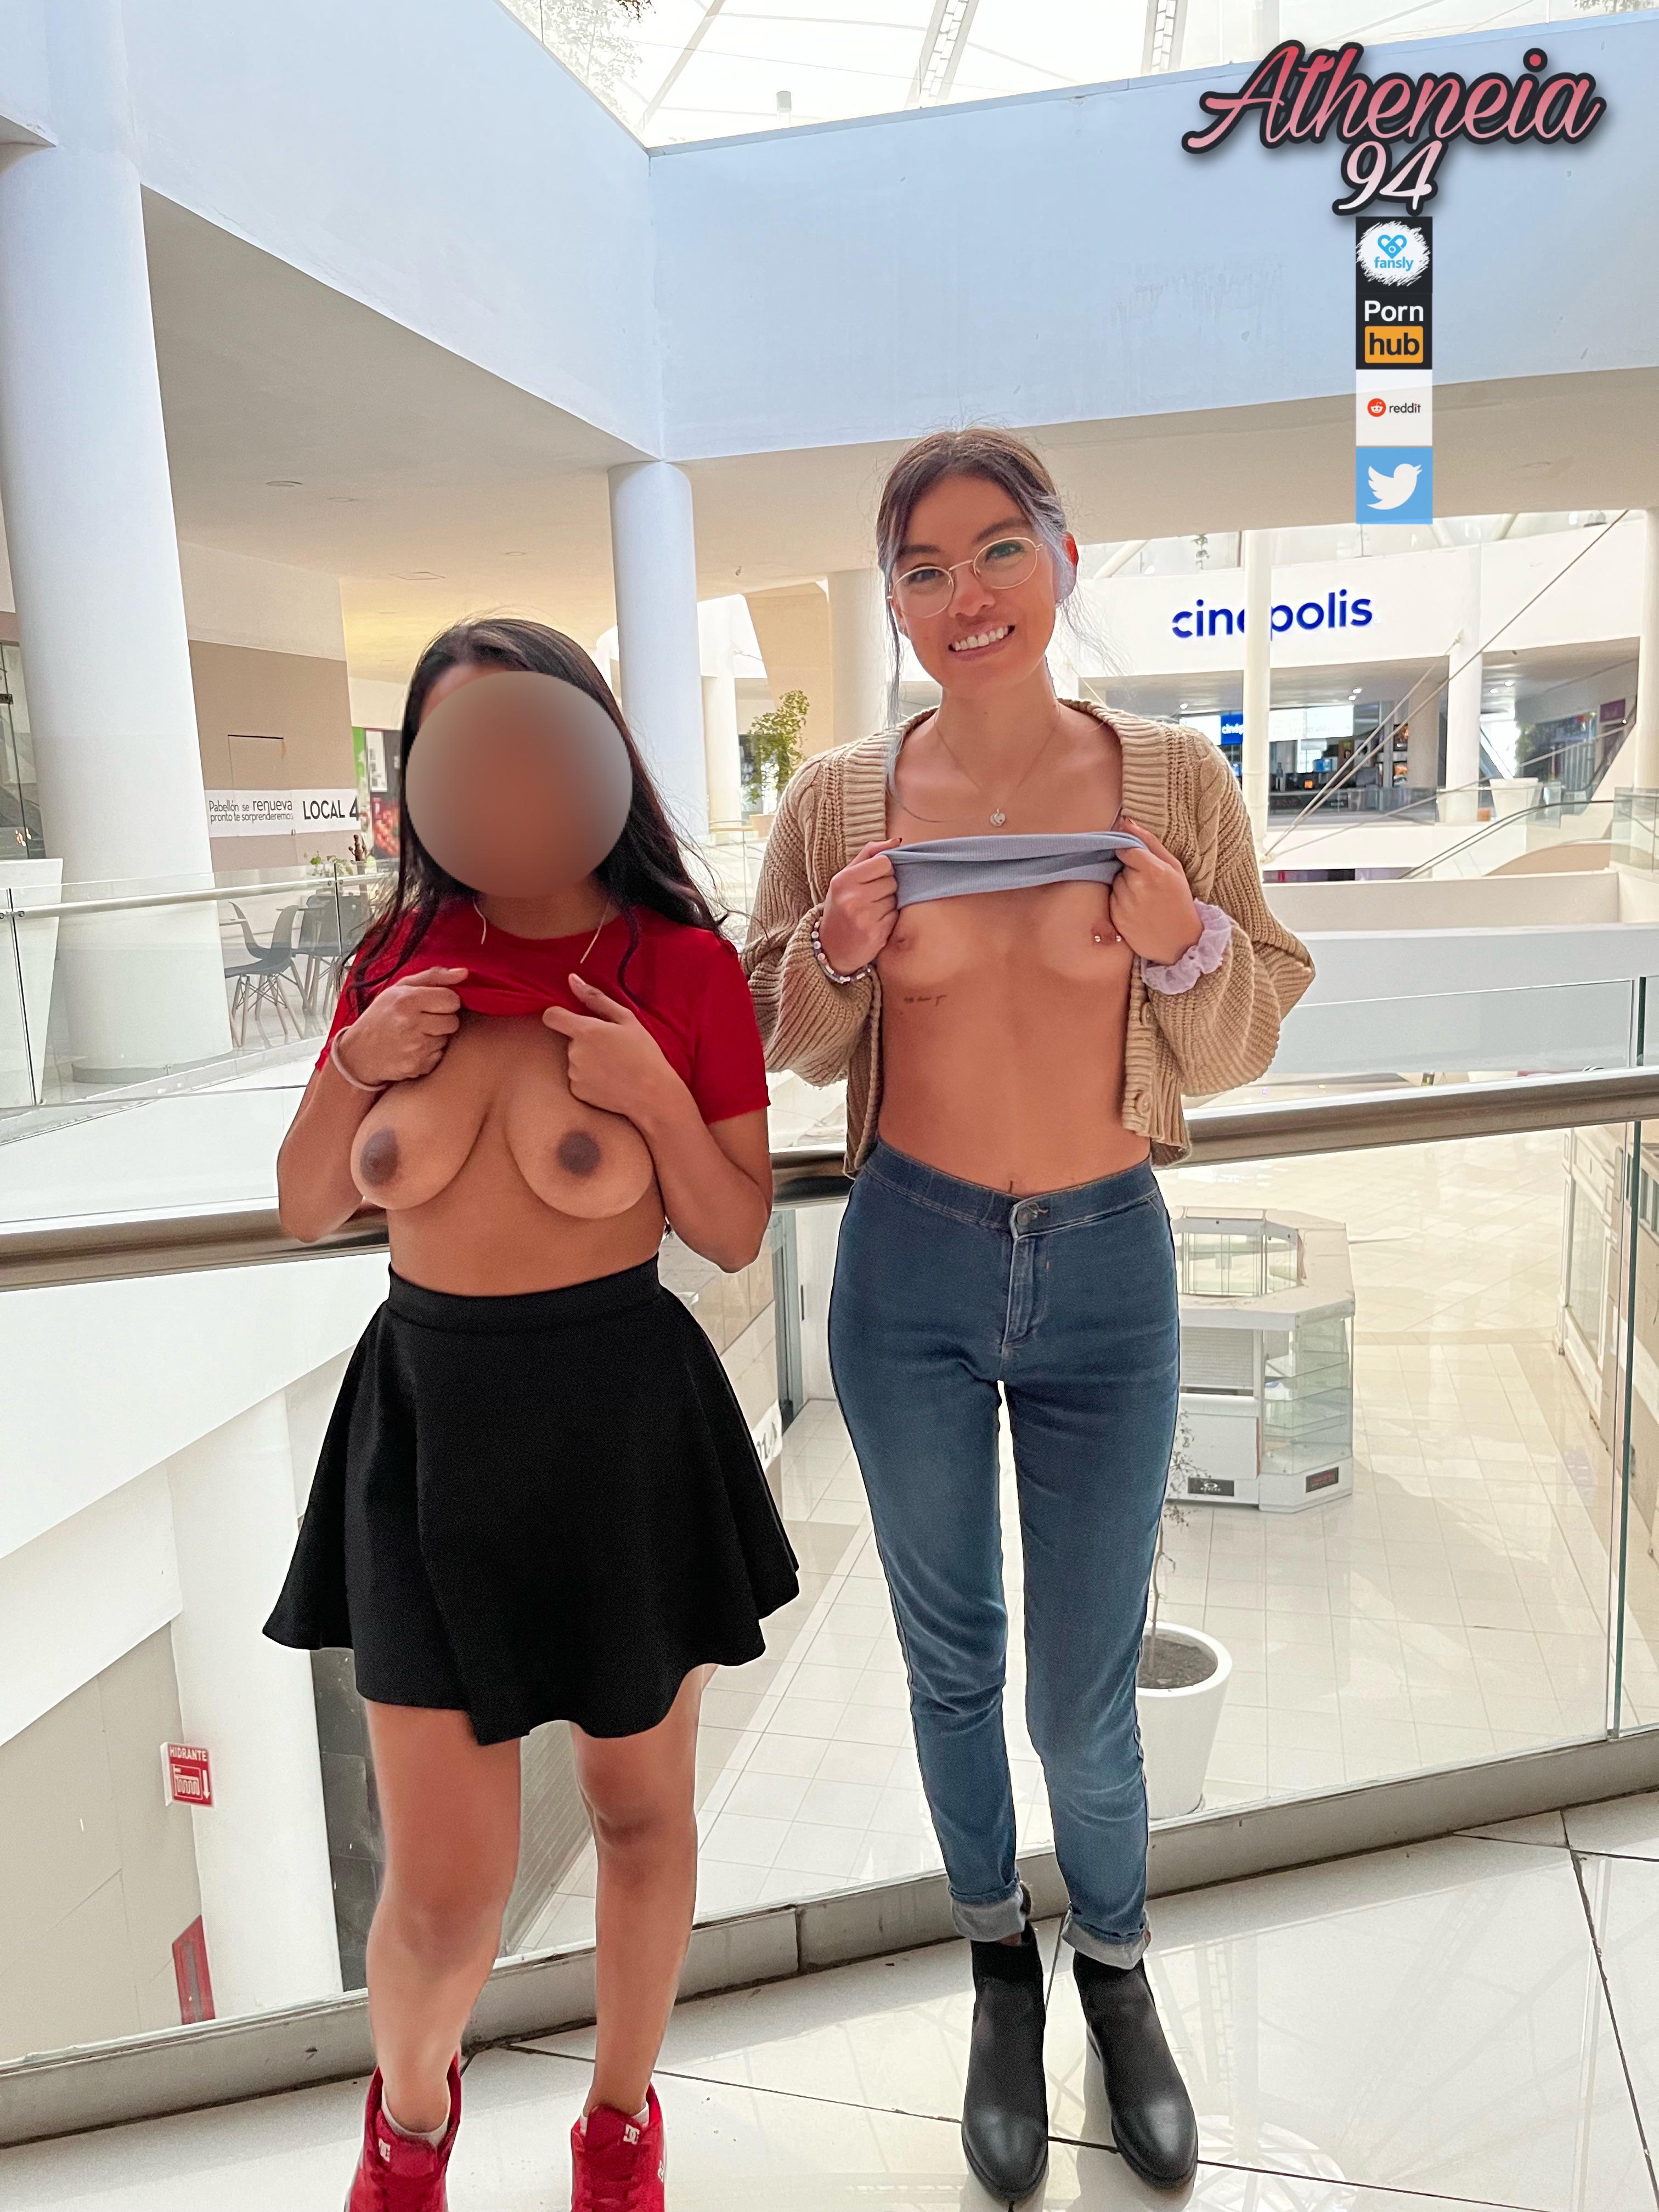 My Tits Are Public - My friend and i love to show our tits to the public and see their naughty